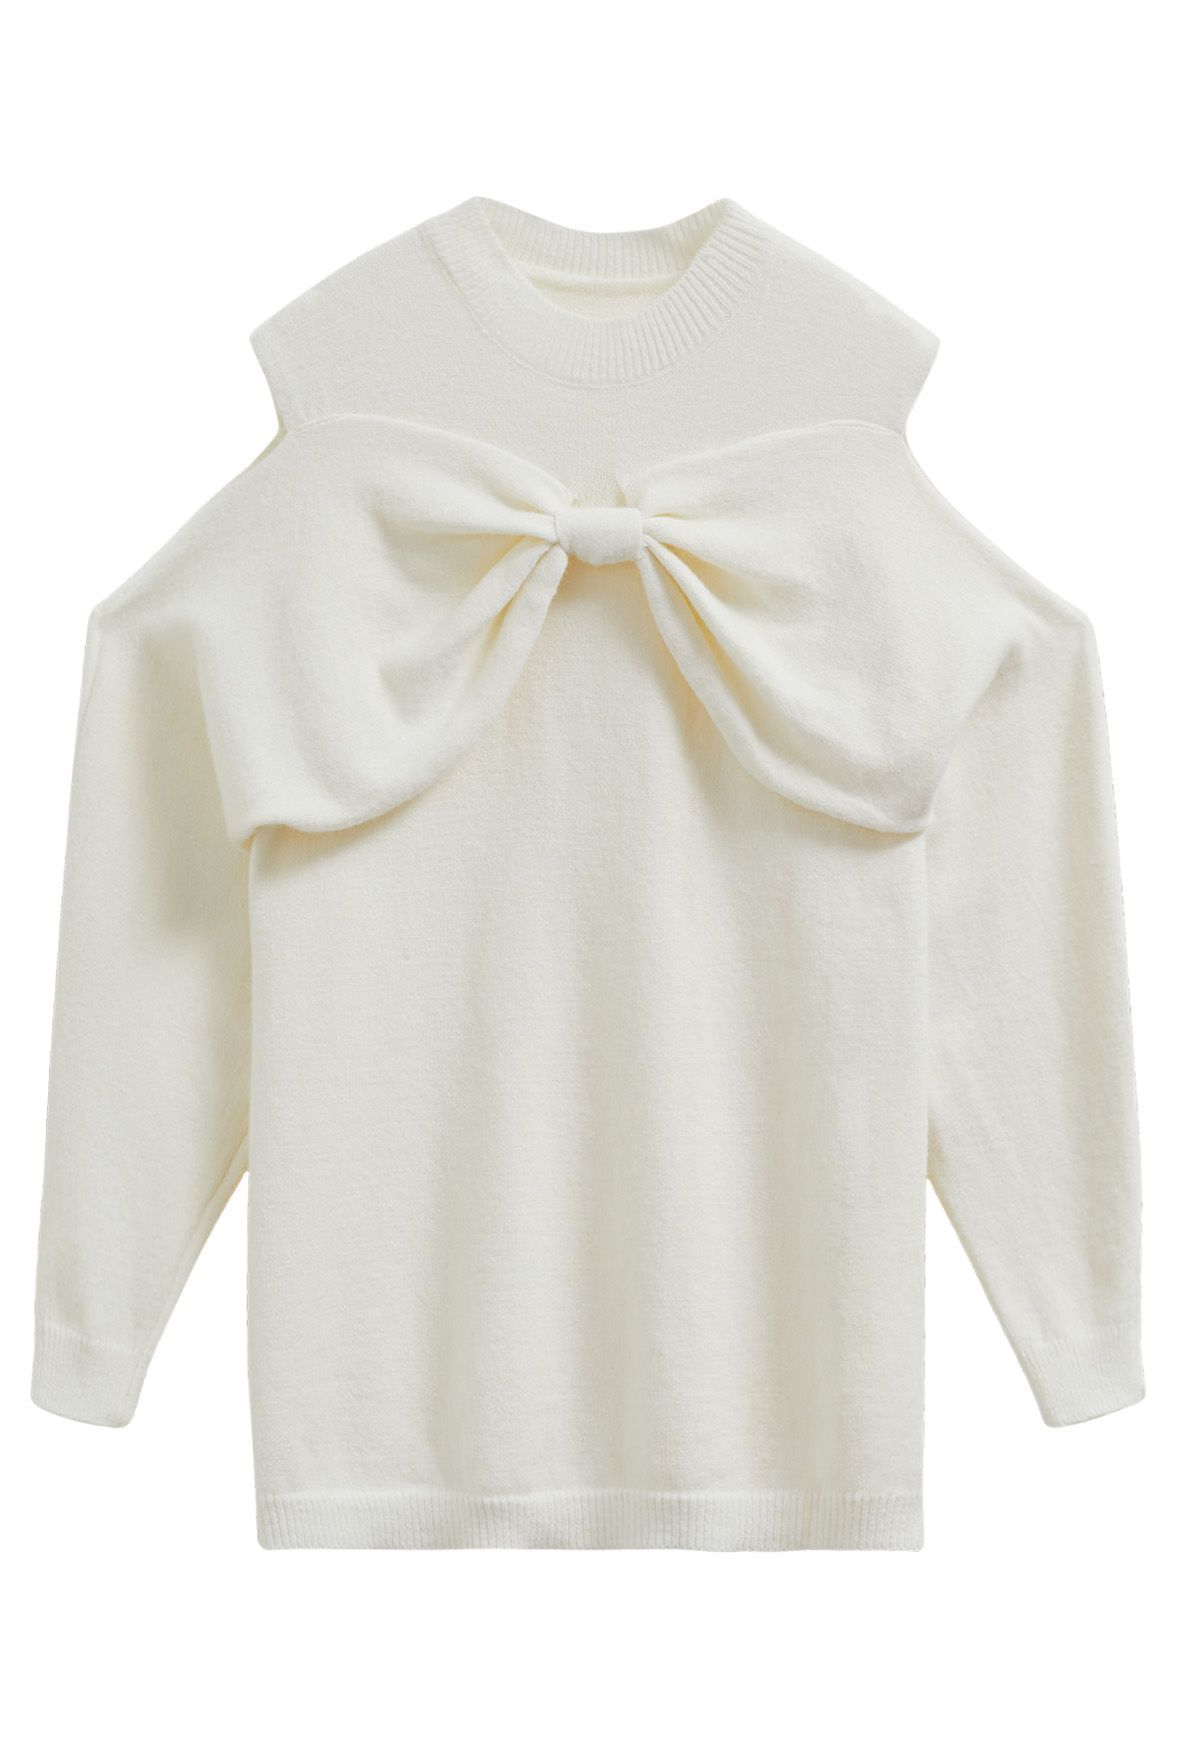 Bowknot Cold-Shoulder Knit Sweater in Cream | Chicwish